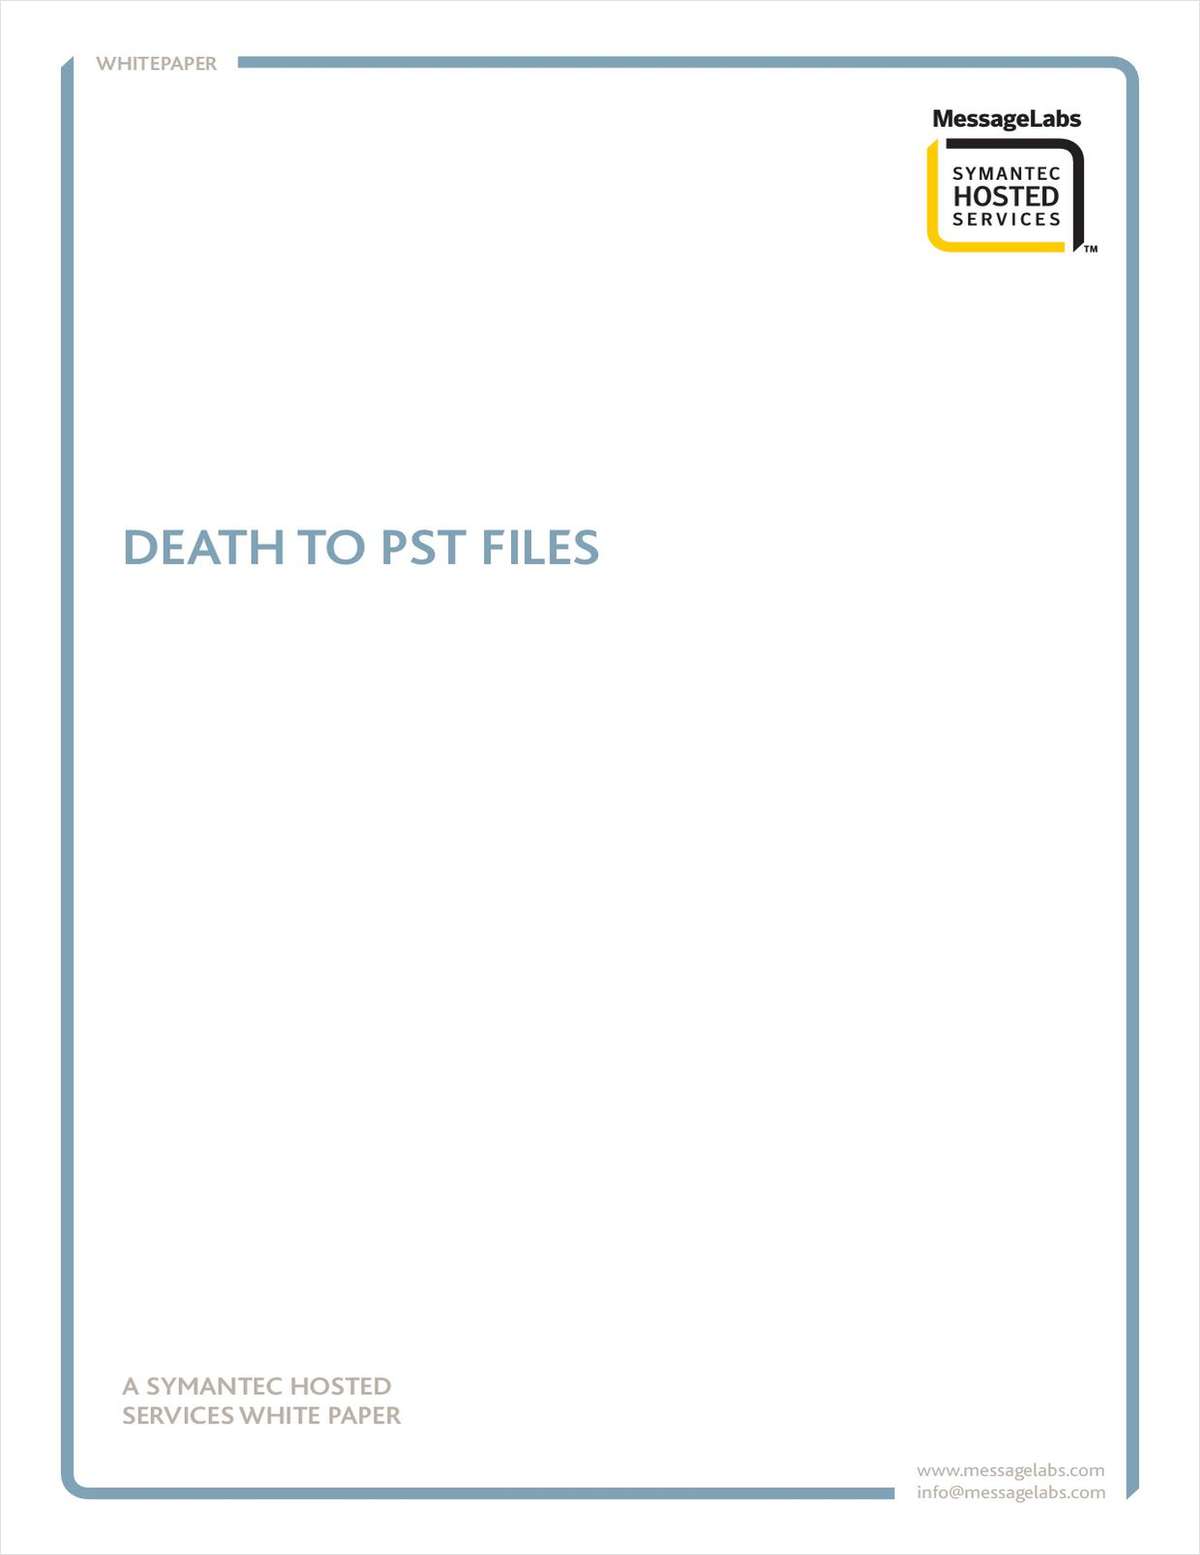 Death to PST Files